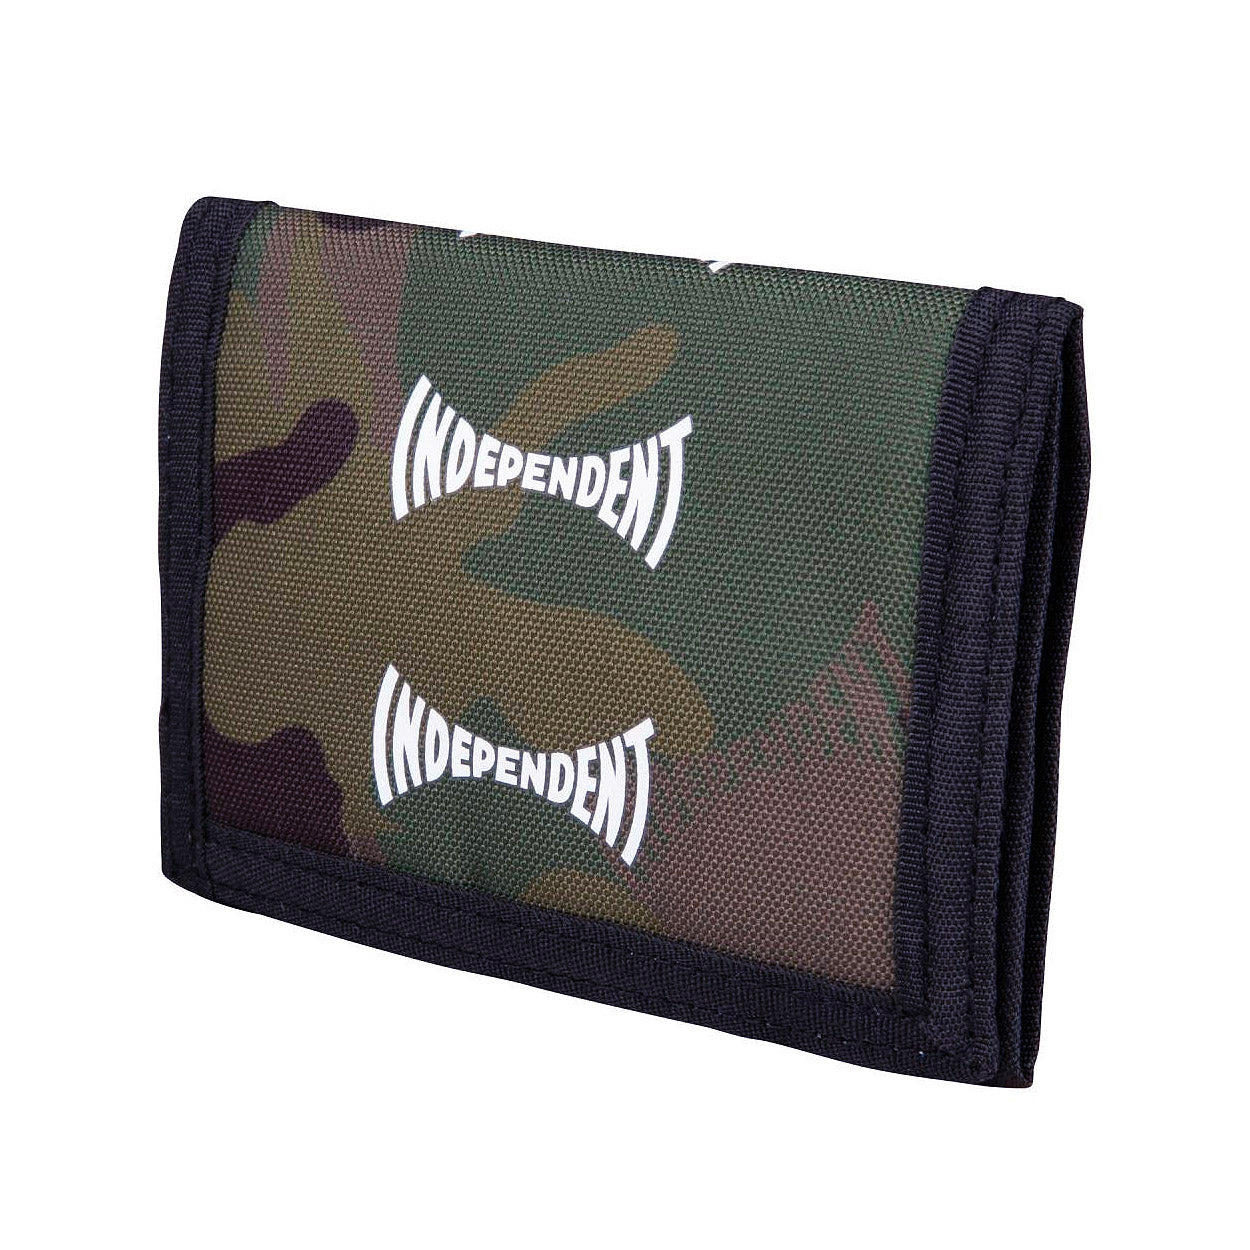 Independent Span Camo Wallet - Camo - Prime Delux Store